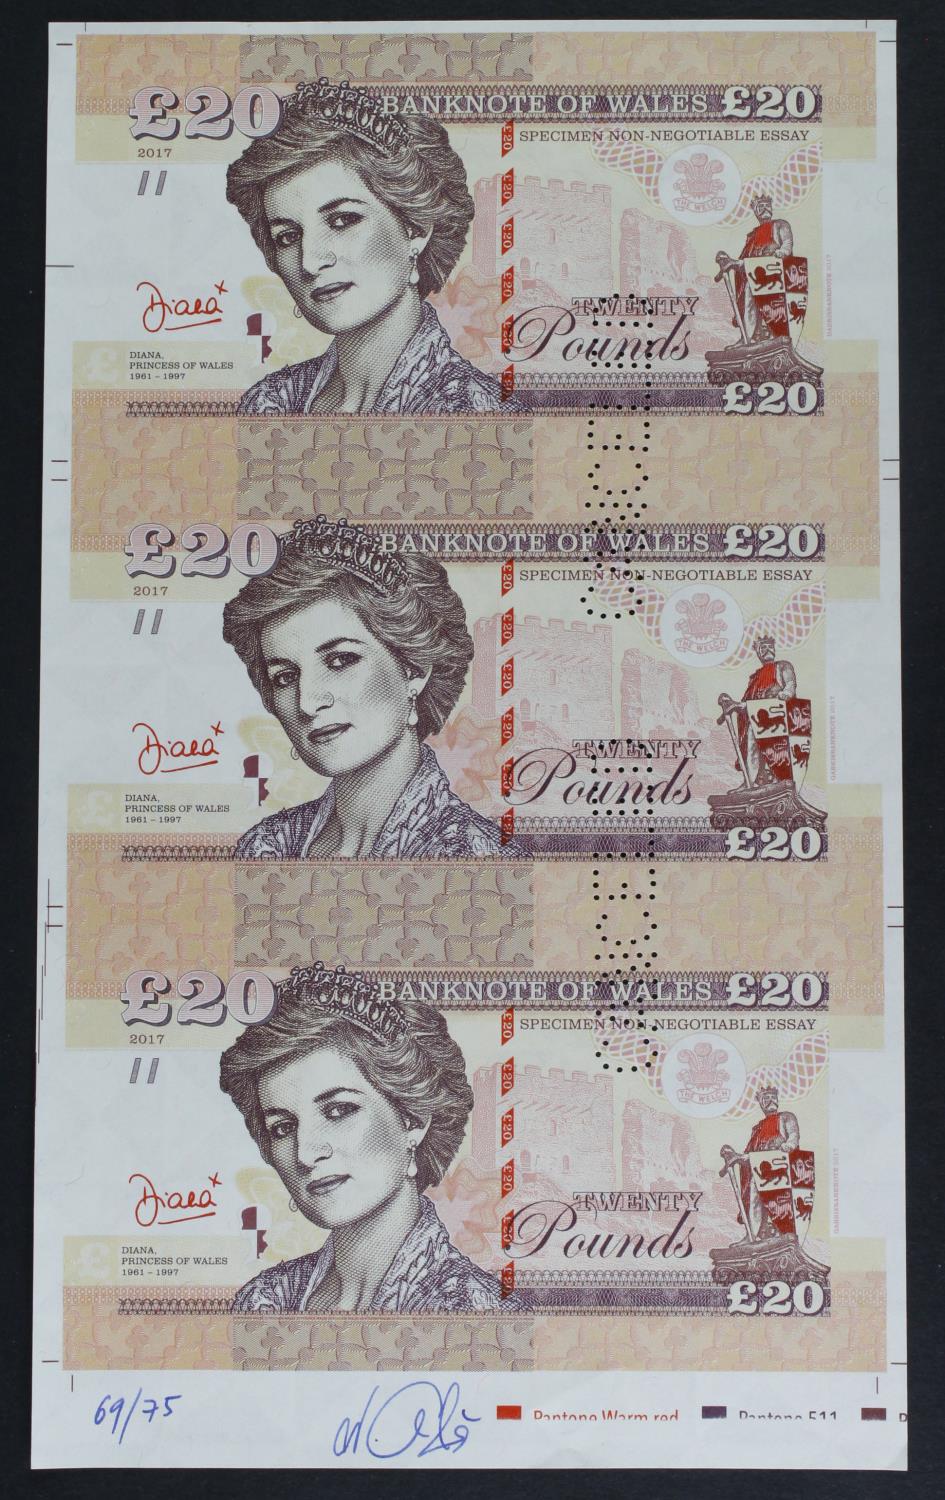 Test Note, 20 Pounds Banknote of Wales (not legal tender), private essay security printing